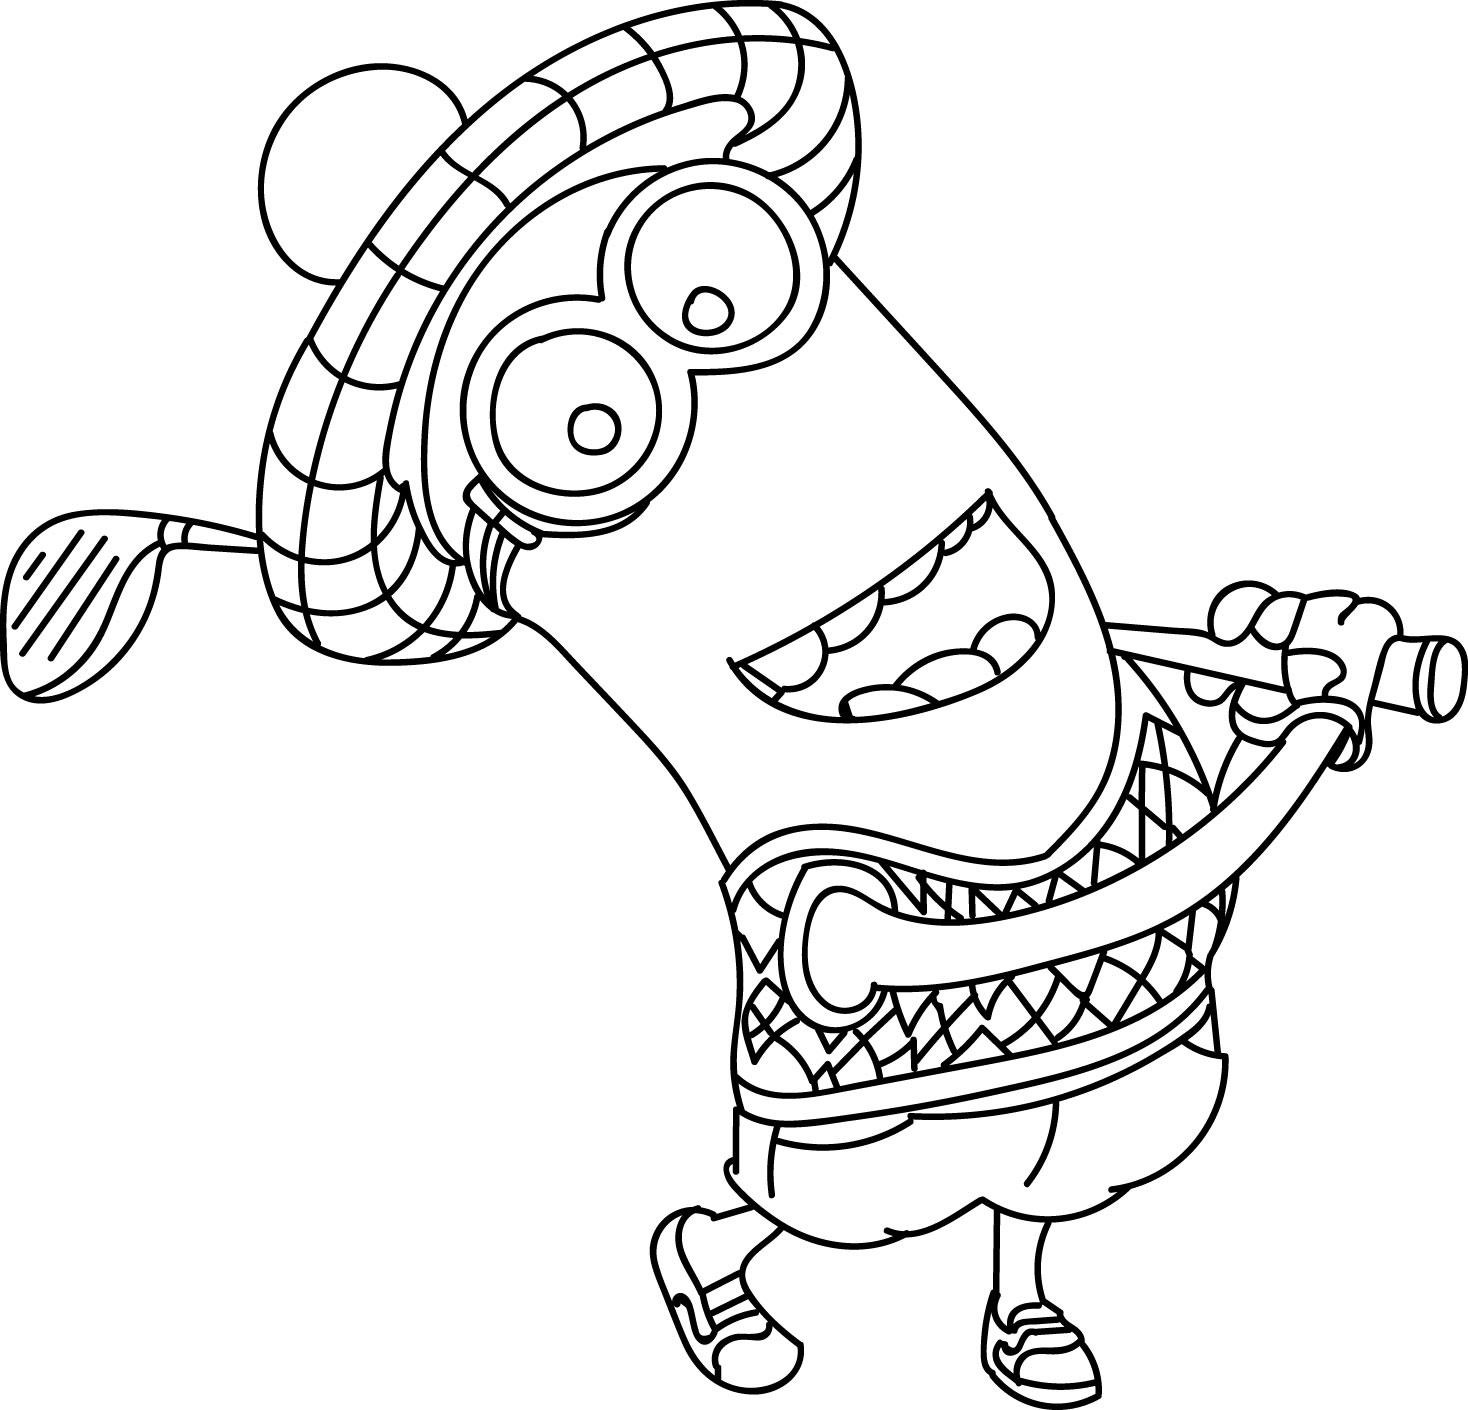 Minion-Kevin-Golf-Coloring-Page